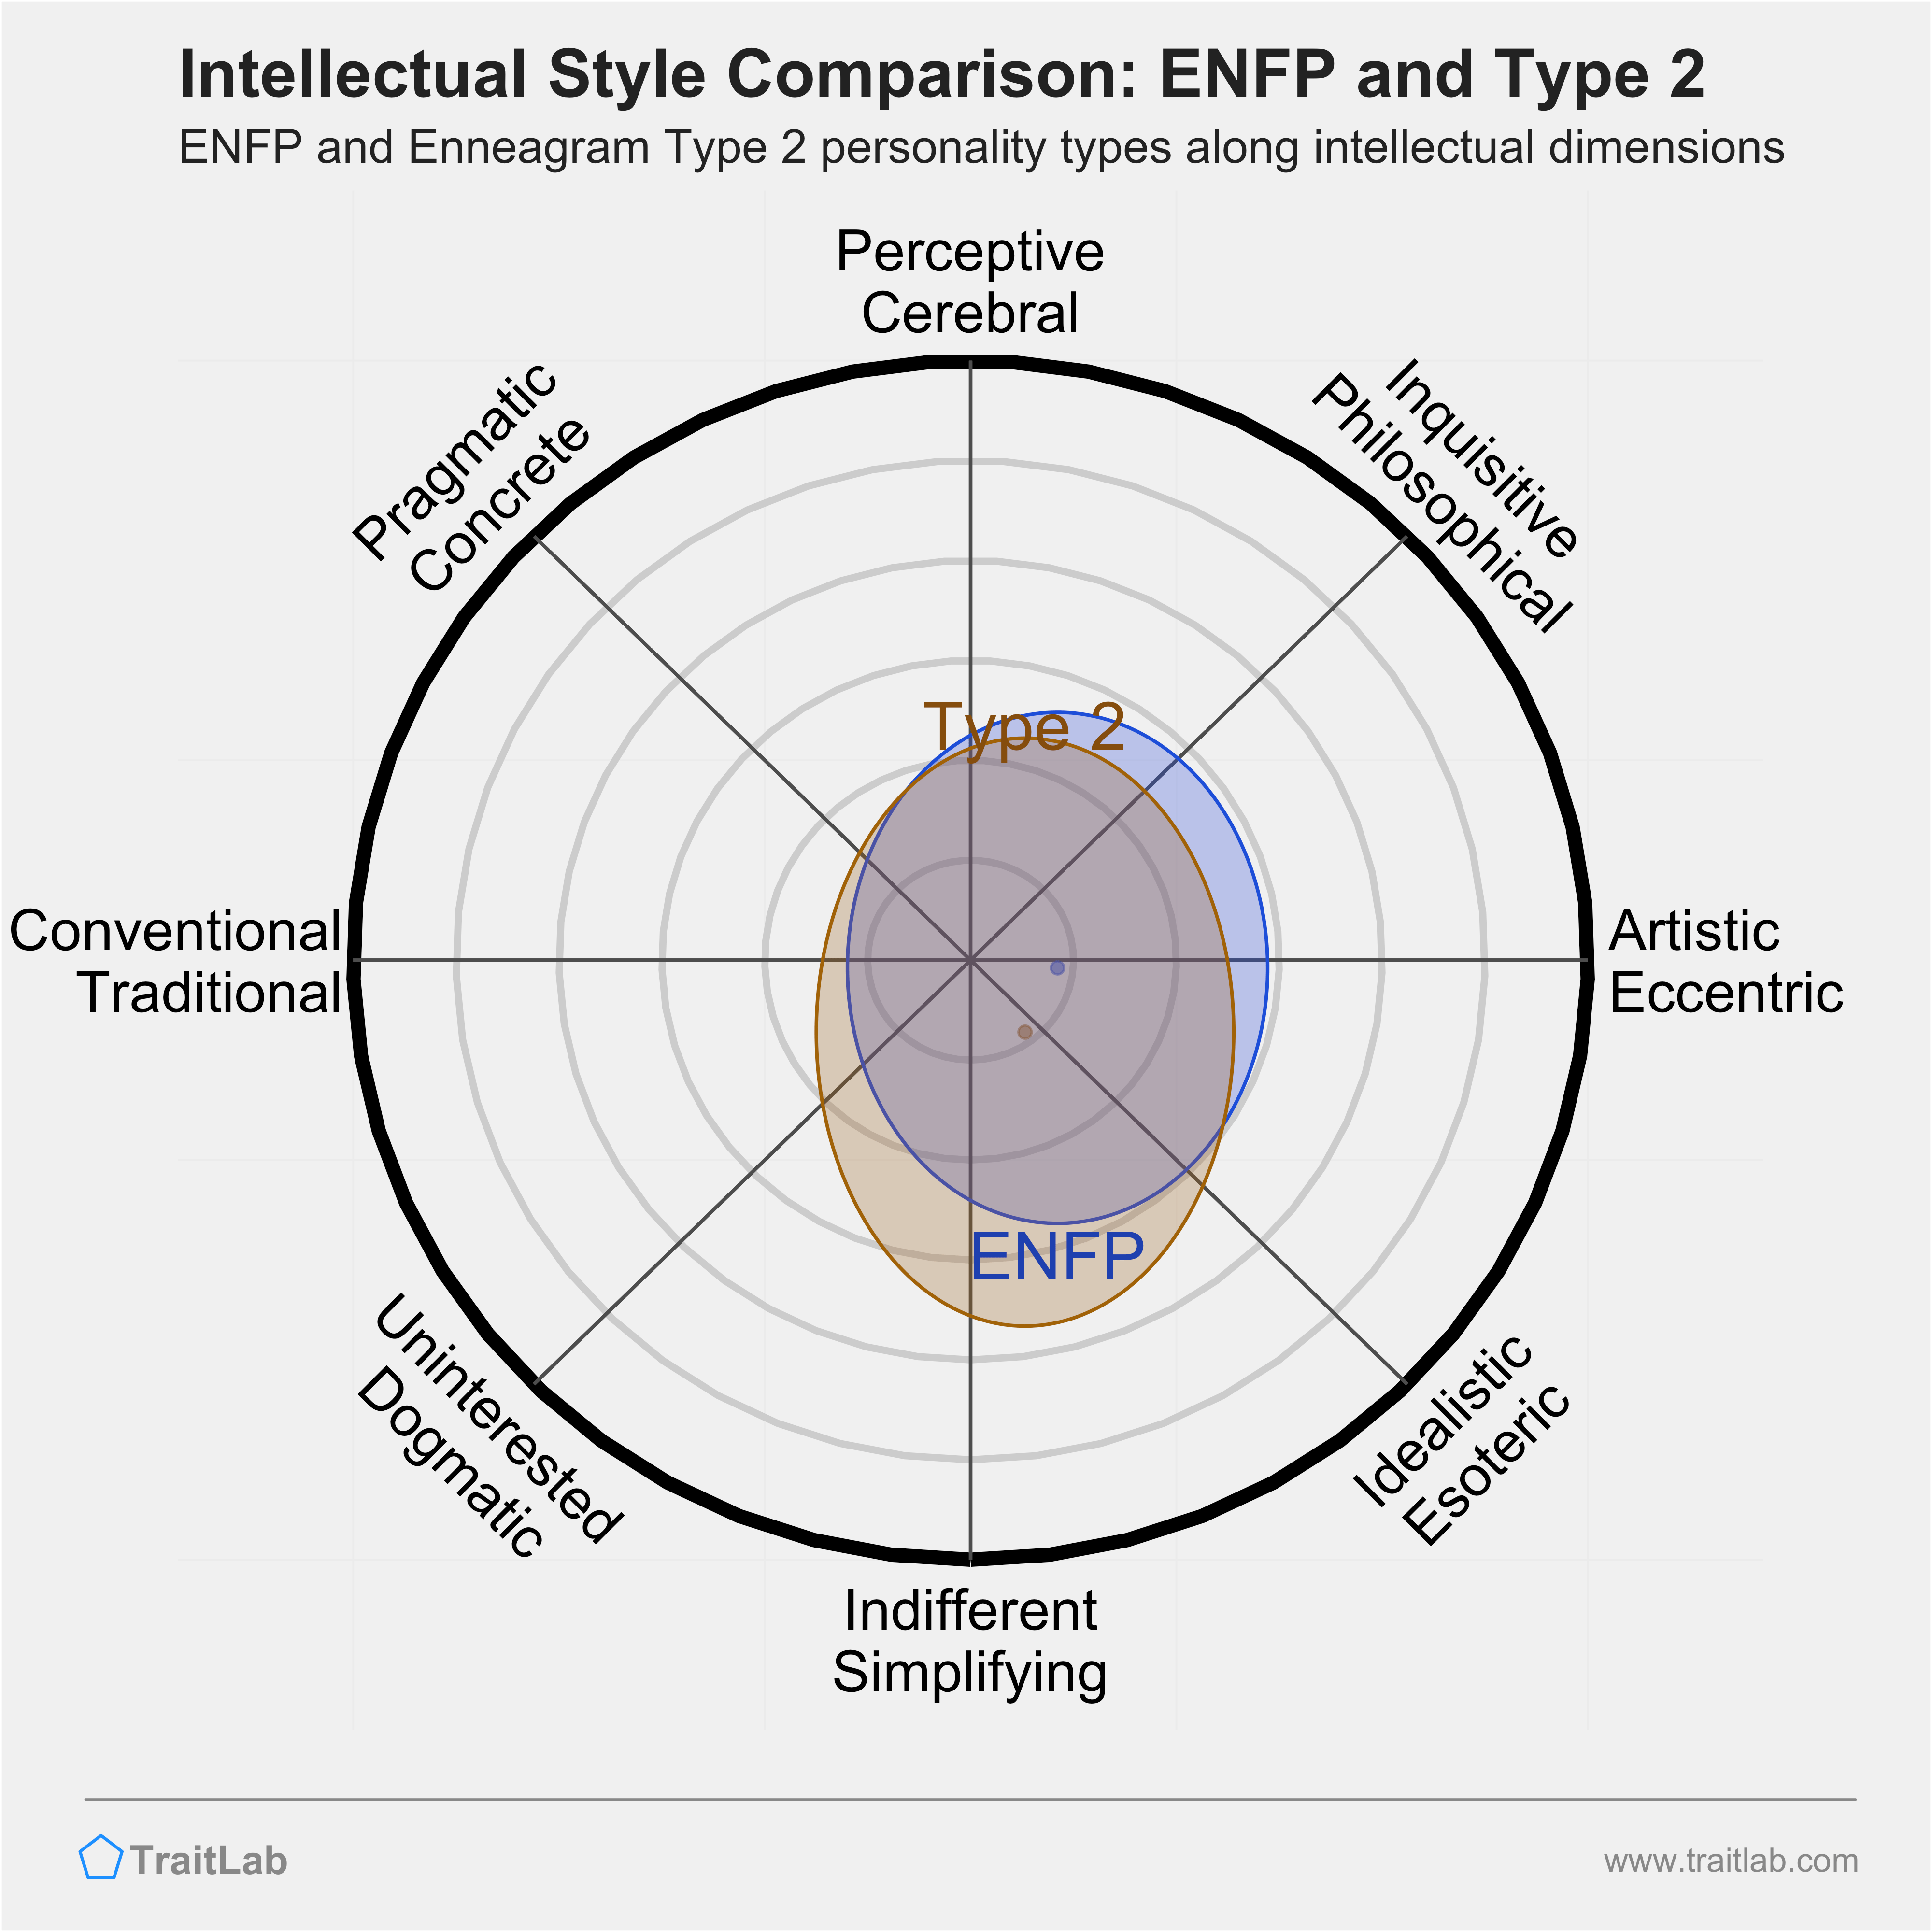 ENFP and Type 2 comparison across intellectual dimensions